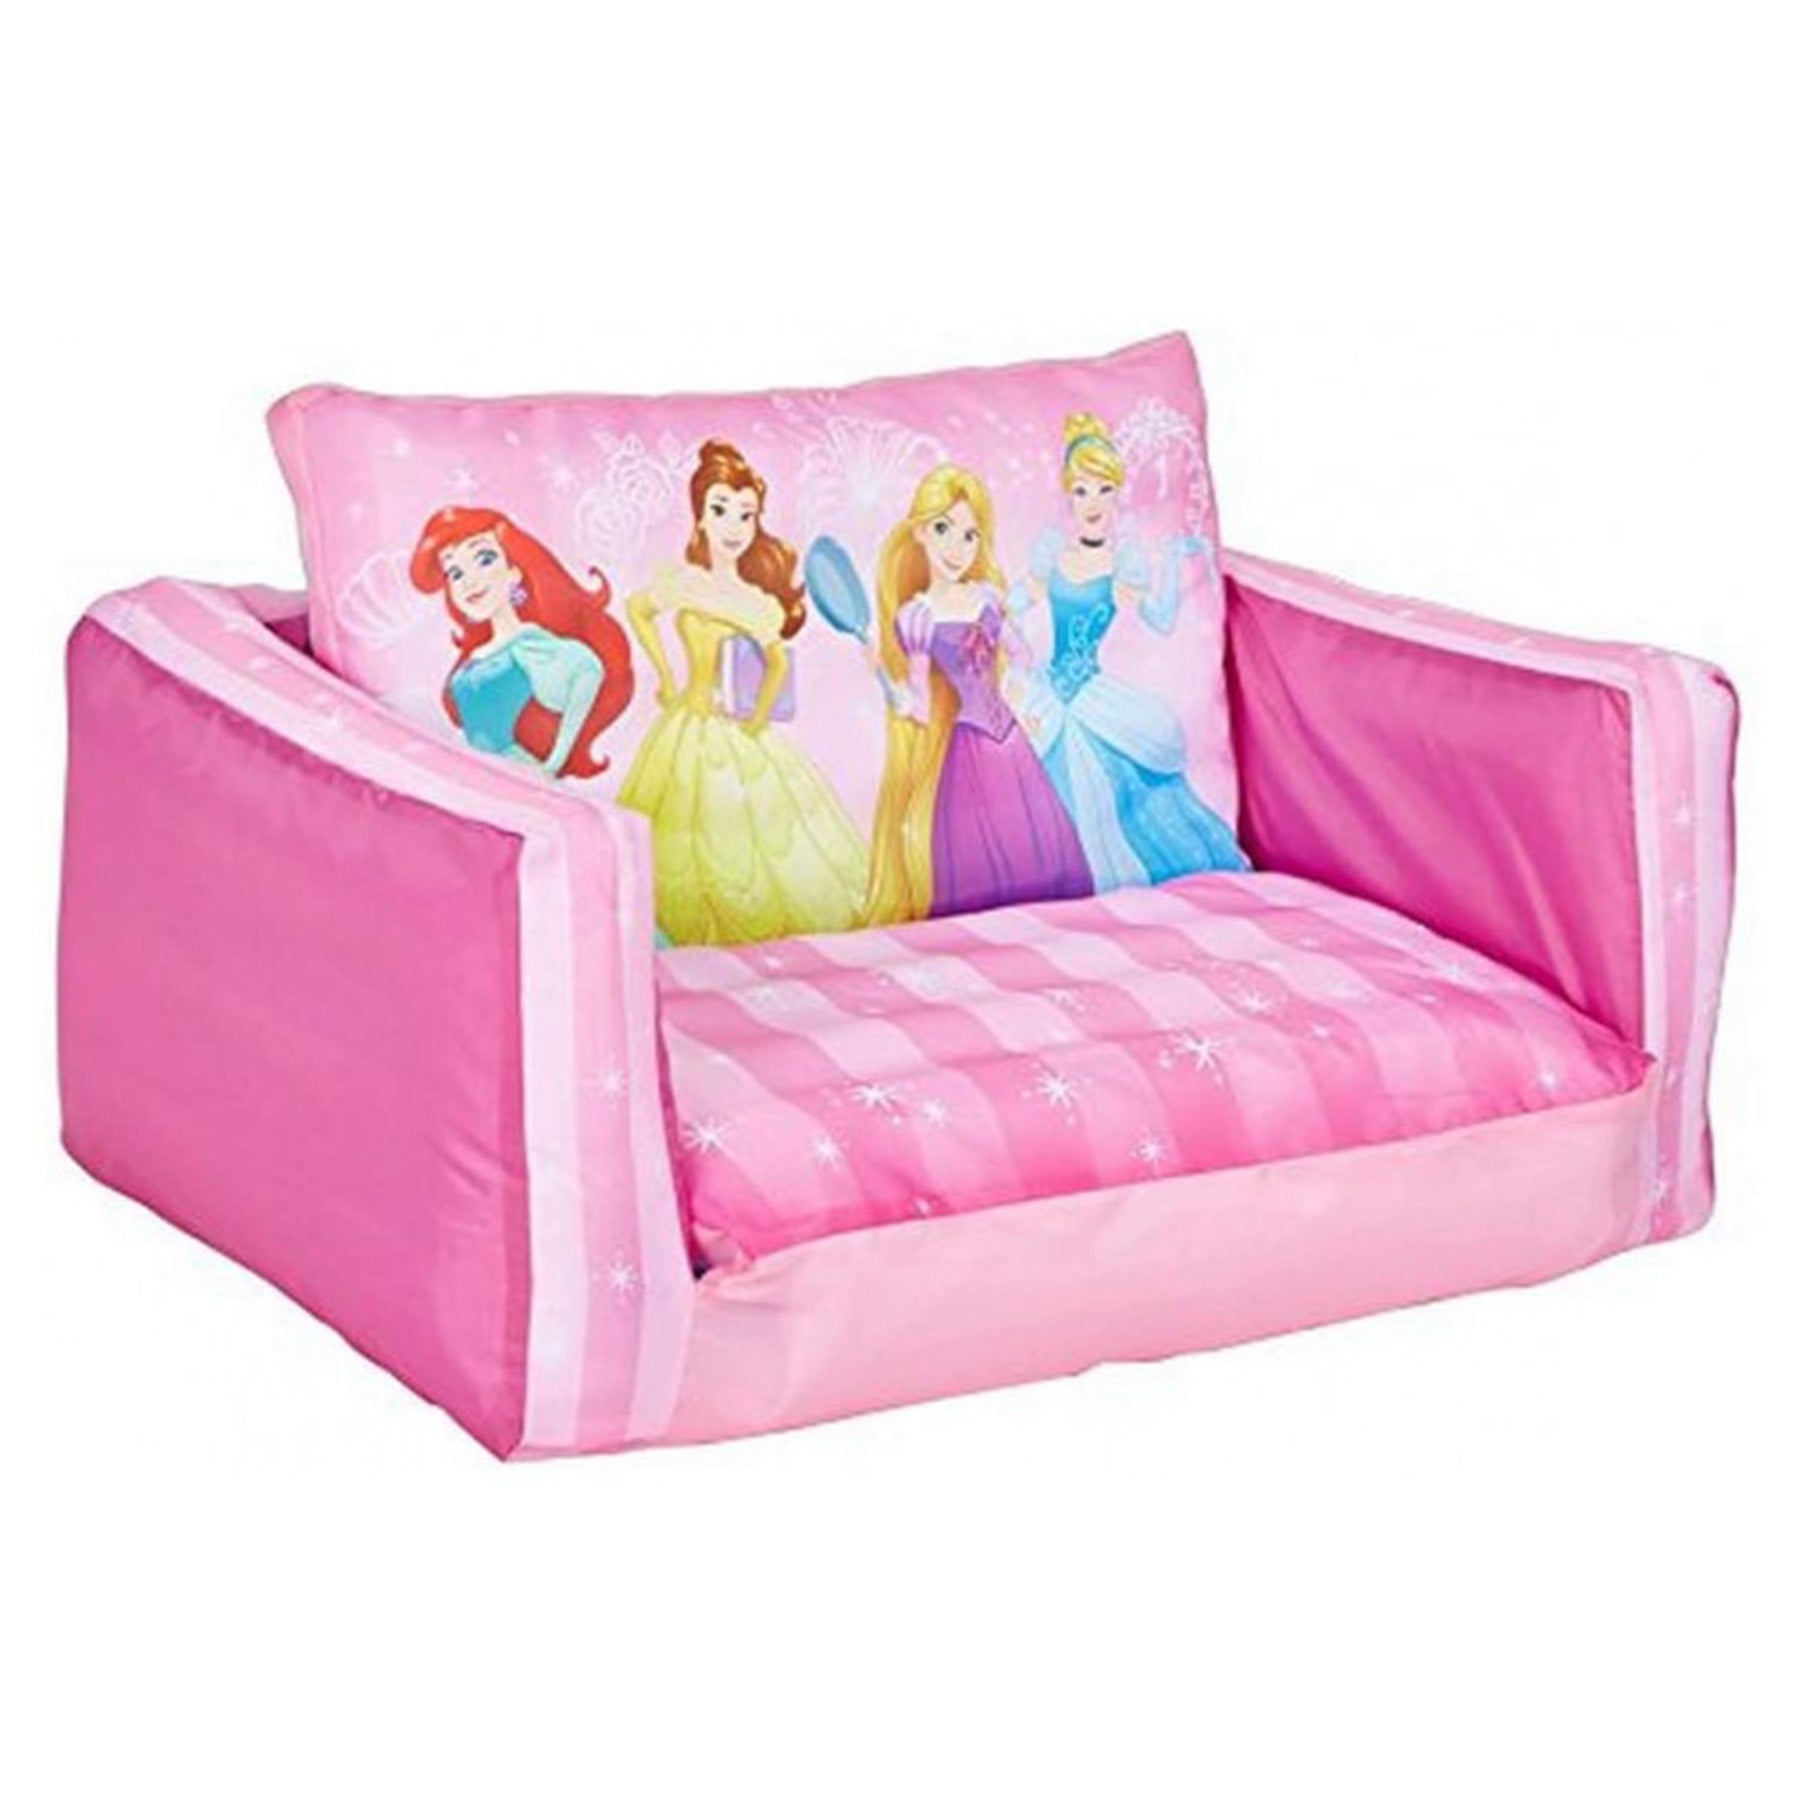 2 in 1 princess sofa & inflatable chair